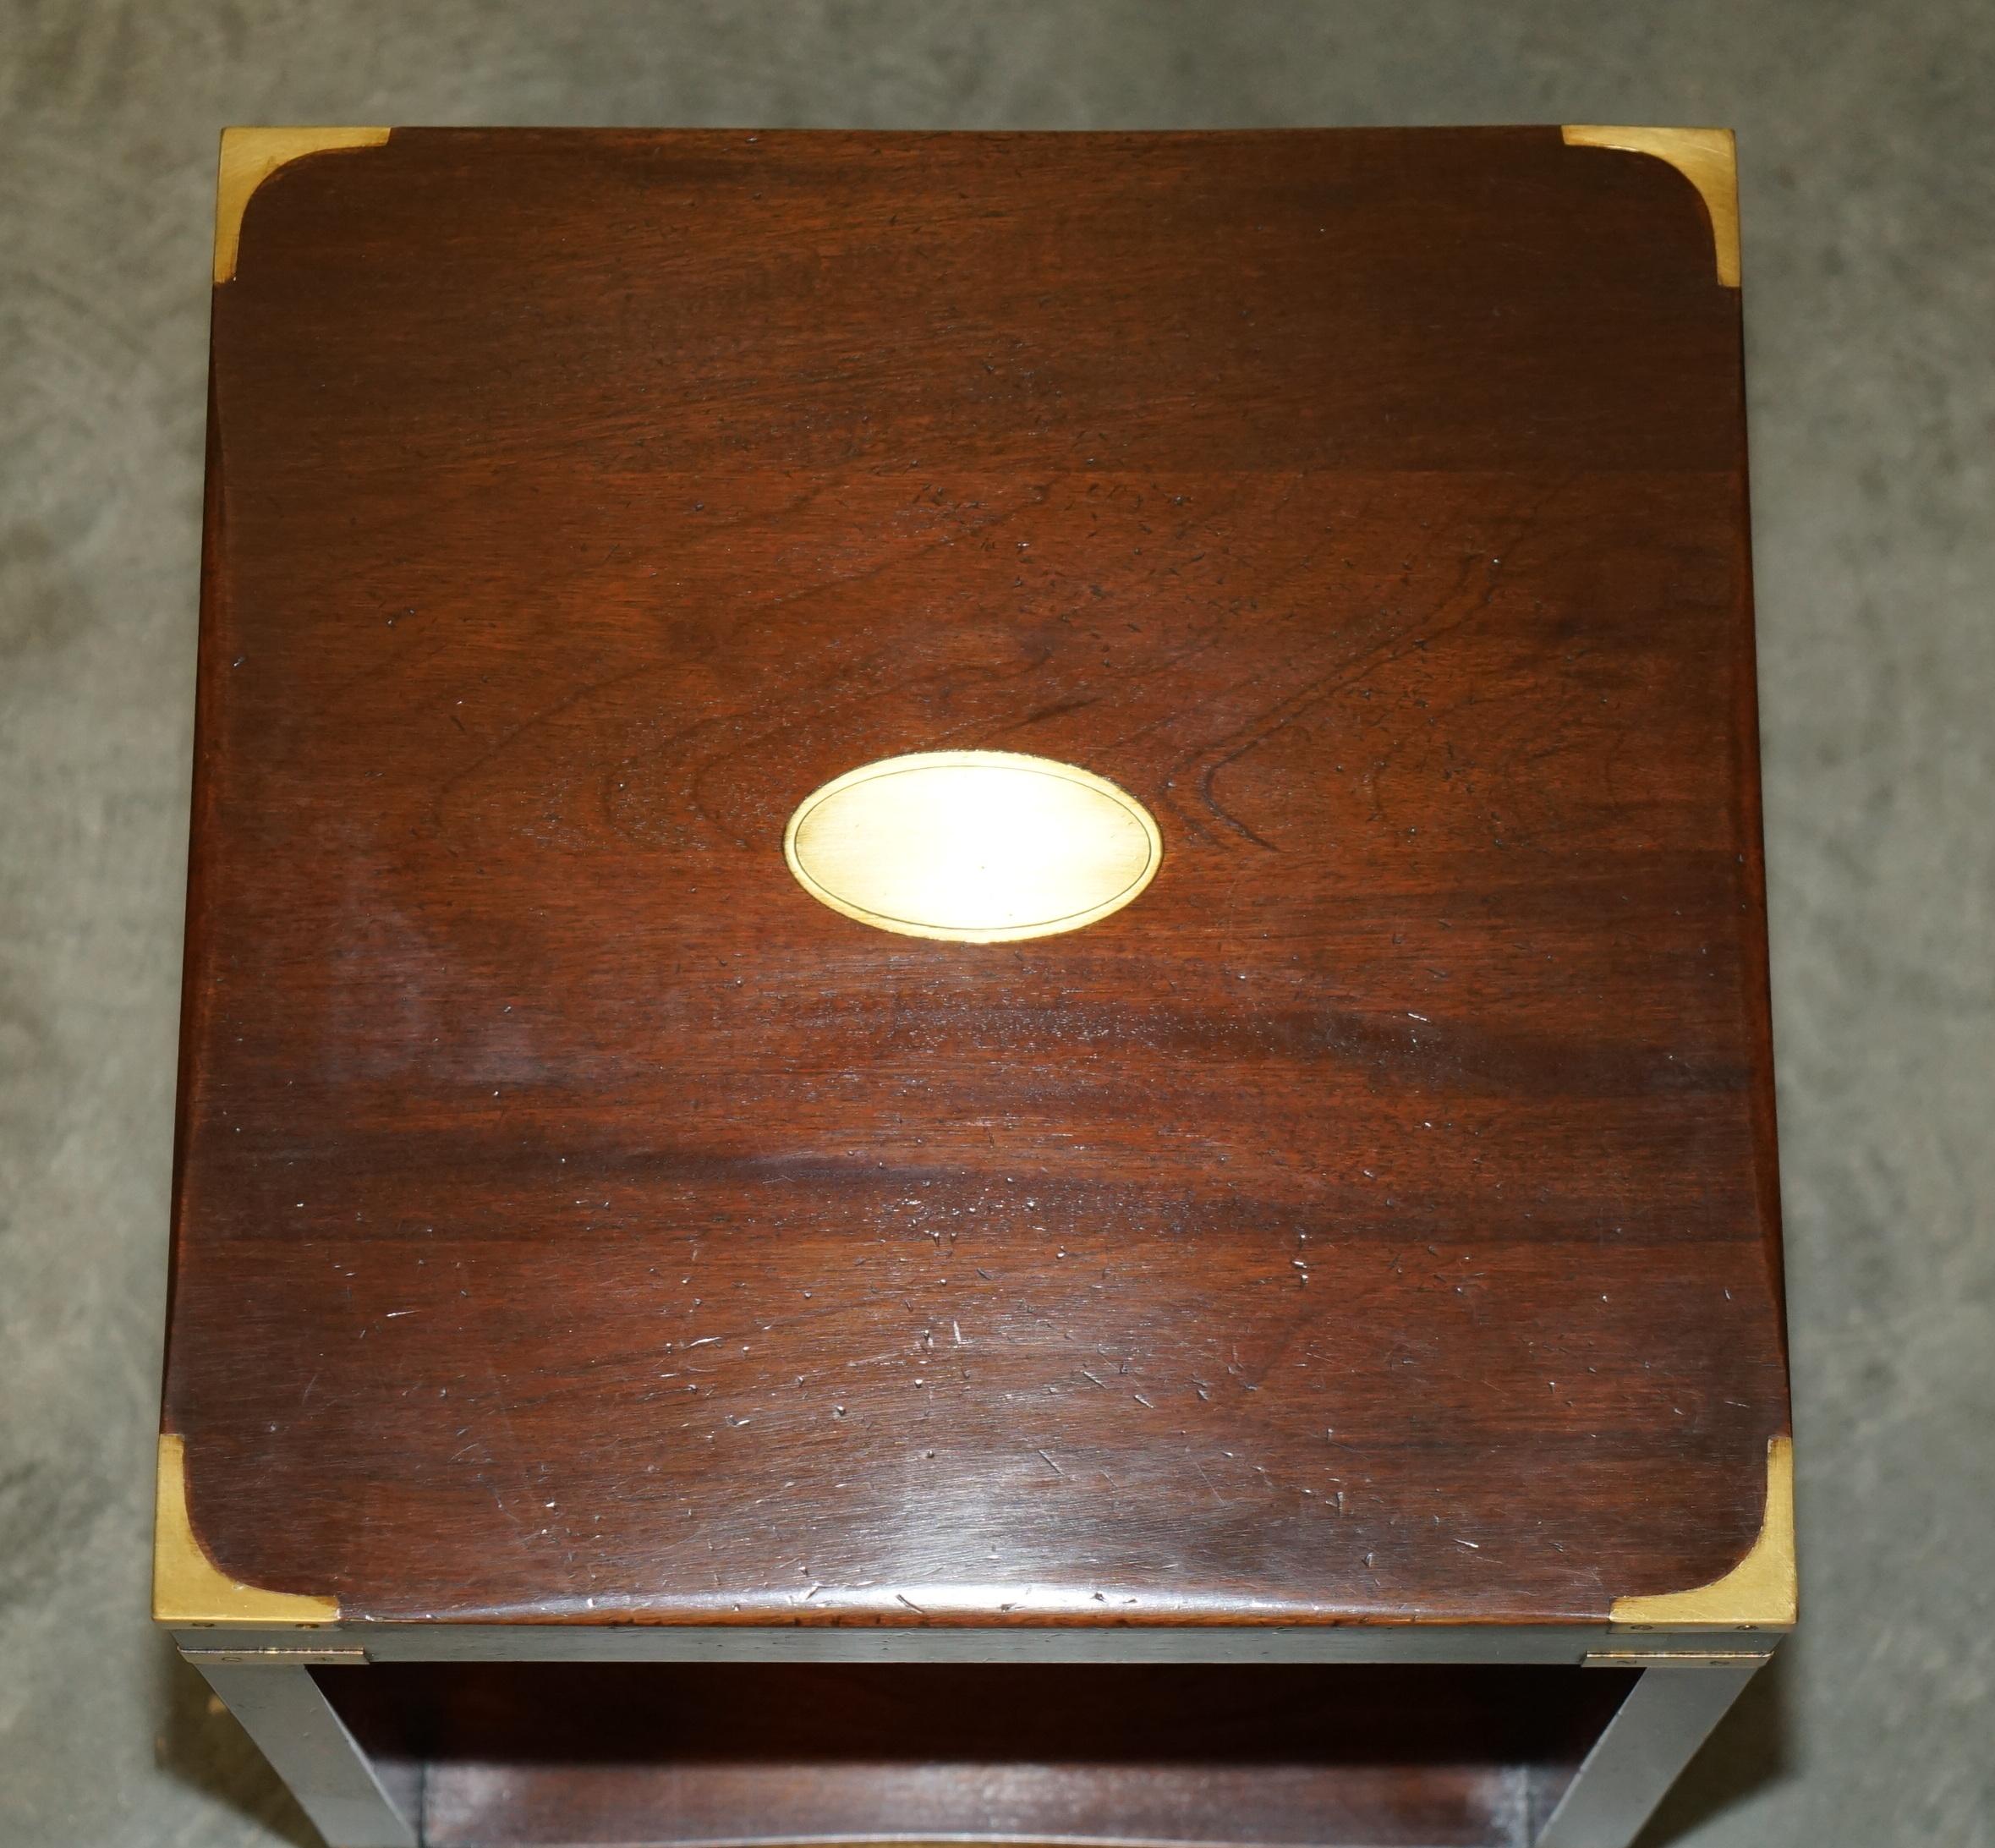 English LUXURY HARRODS LONDON KENNEDY MILITARY CAMPAIGN HiGH SIDE END TABLE HARDWOOD For Sale